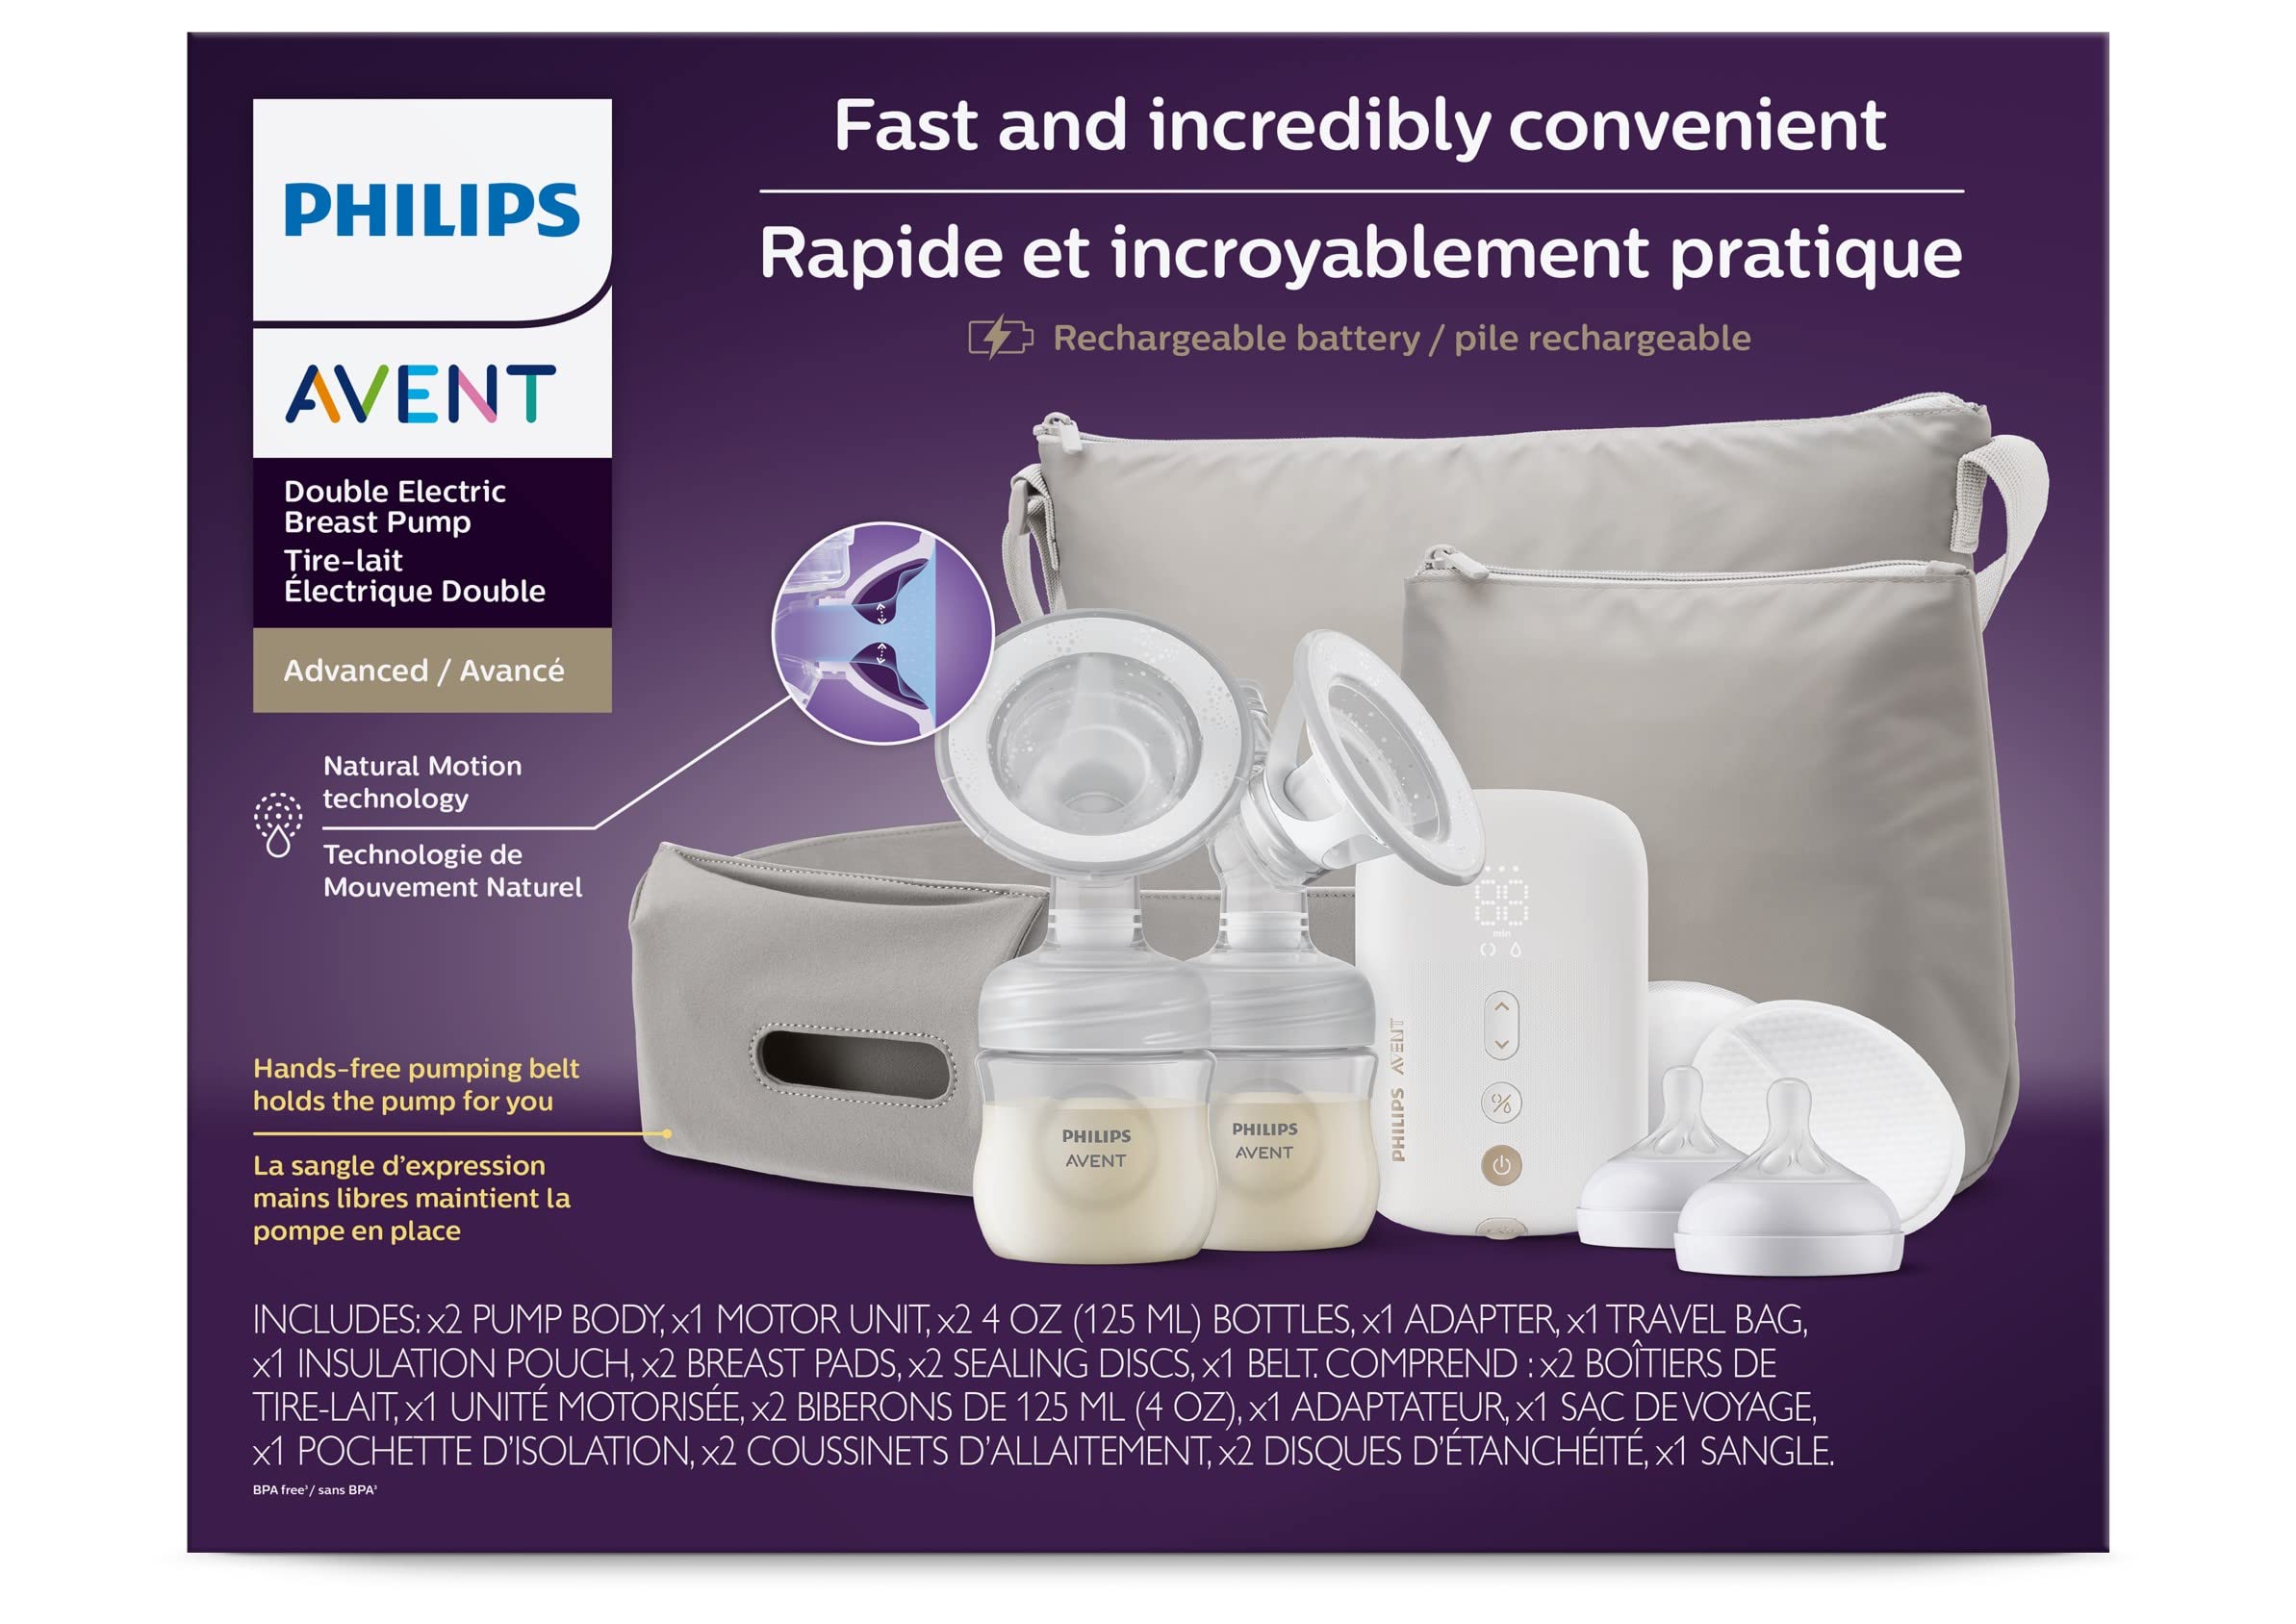 Philips Avent Breastfeeding Bundle with Double Electric Breast Pump + Breast Milk Storage Bags, 6 Ounce, 50 Pack + Disposable Breast Pads, 100 Pack